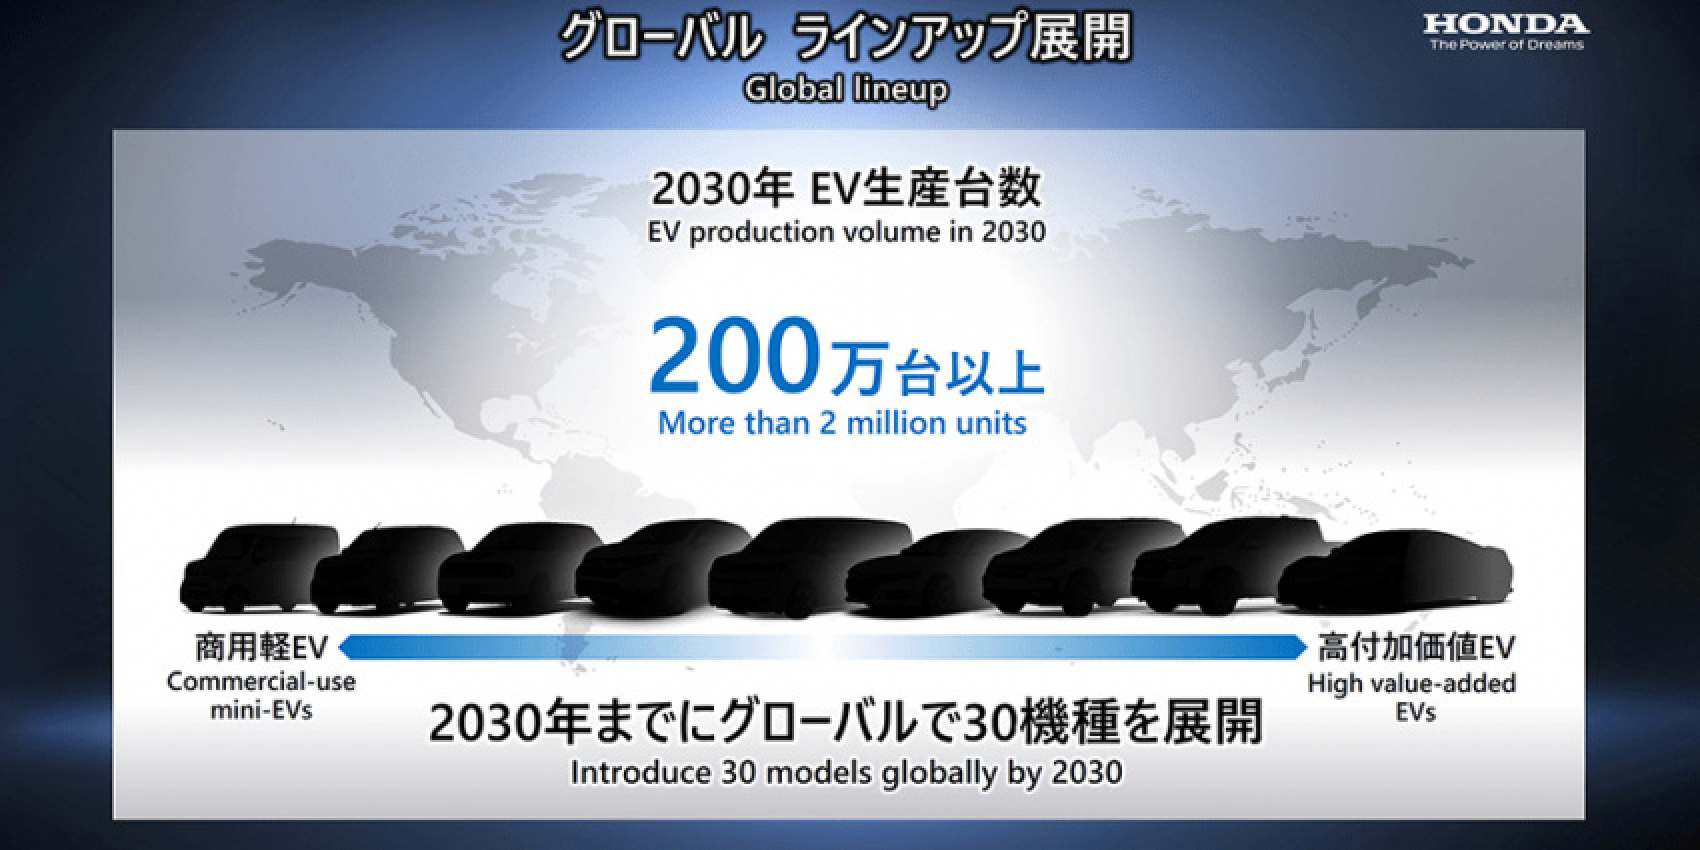 automobile, autos, cars, electric vehicle, honda, aesc, batteries, china, dongfeng, envision aesc, guangzhou, japan, joint venture, wuhan, honda to release 30 electric models by 2030